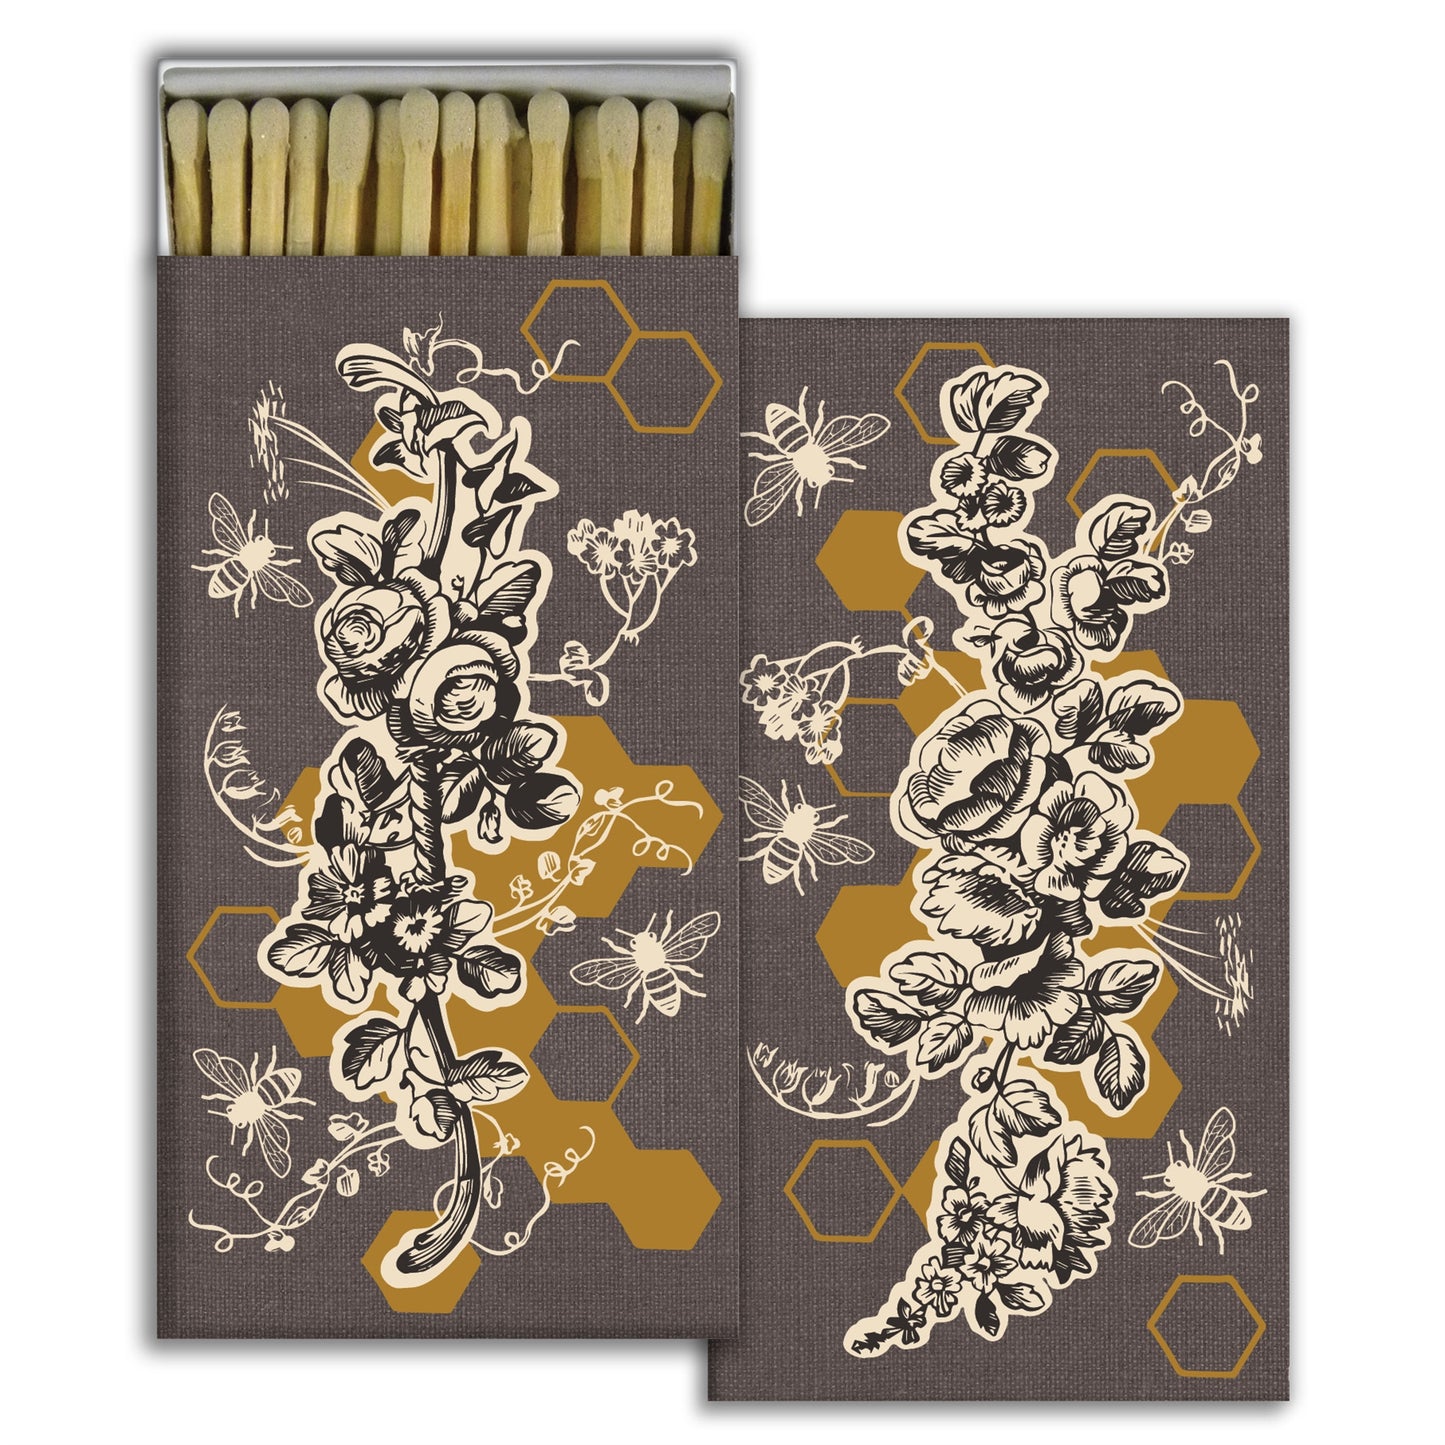 A quintessential article of daily use, our Bee Bouquet Match Boxes feature illustrated flowers, bees and honeycombs with coordinating match tips. Sweet as a hostess gift, a perfect pairing to our Range candles and always an eye catching pop of graphic decor. Safety matches, 50 sticks per box Measures: 4.5" x 2.25"